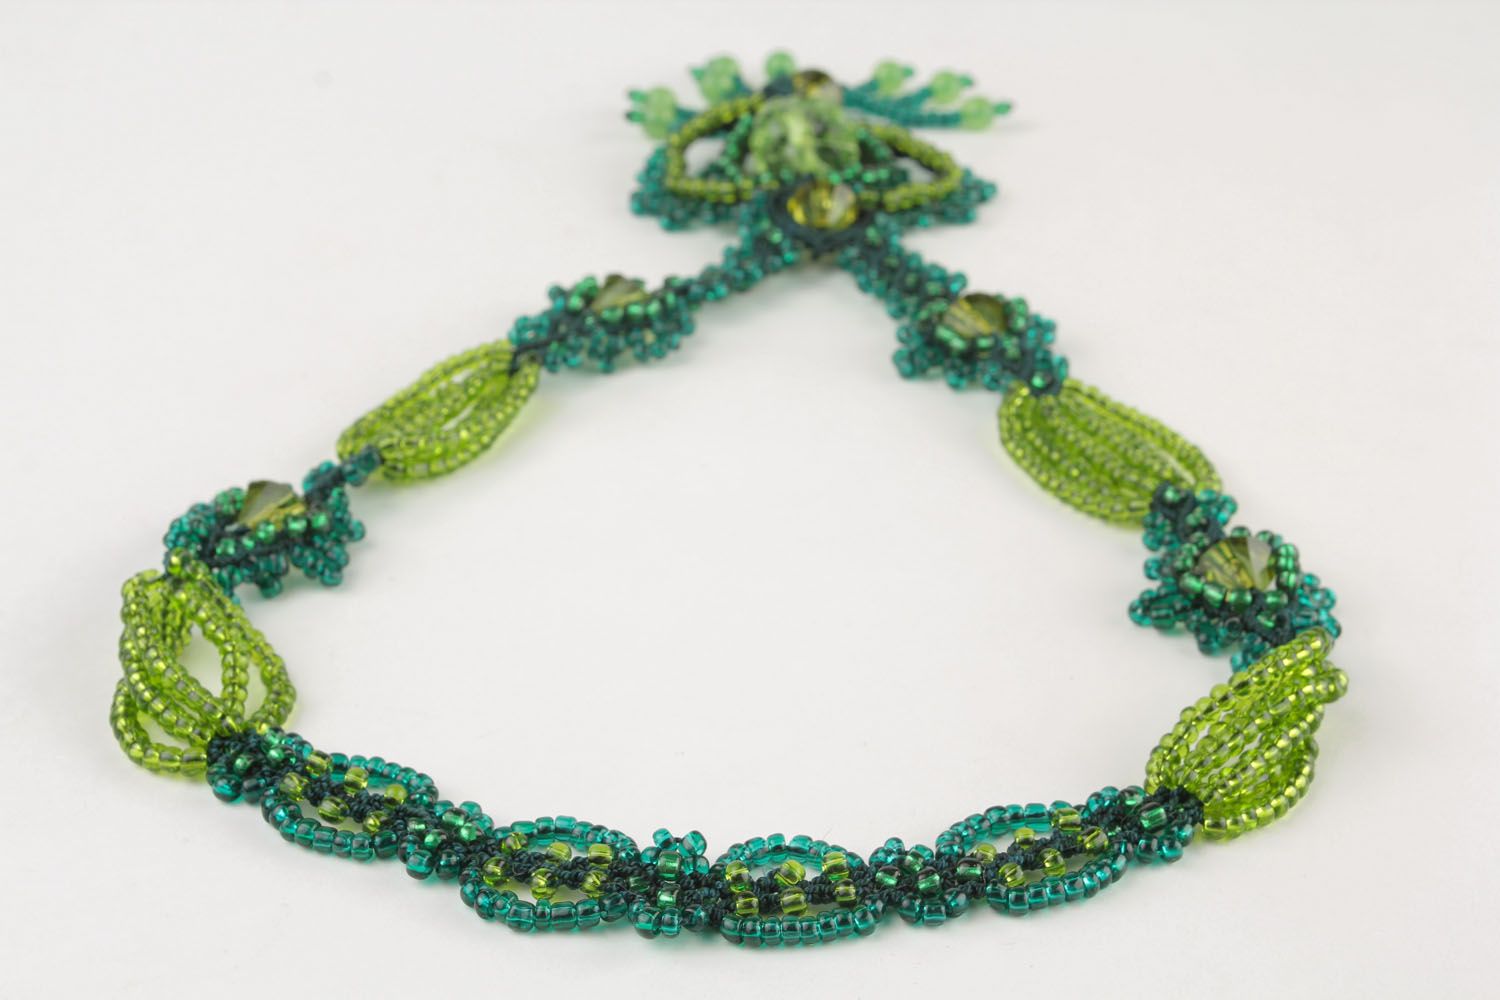 Homemade necklace woven of beads and threads photo 5